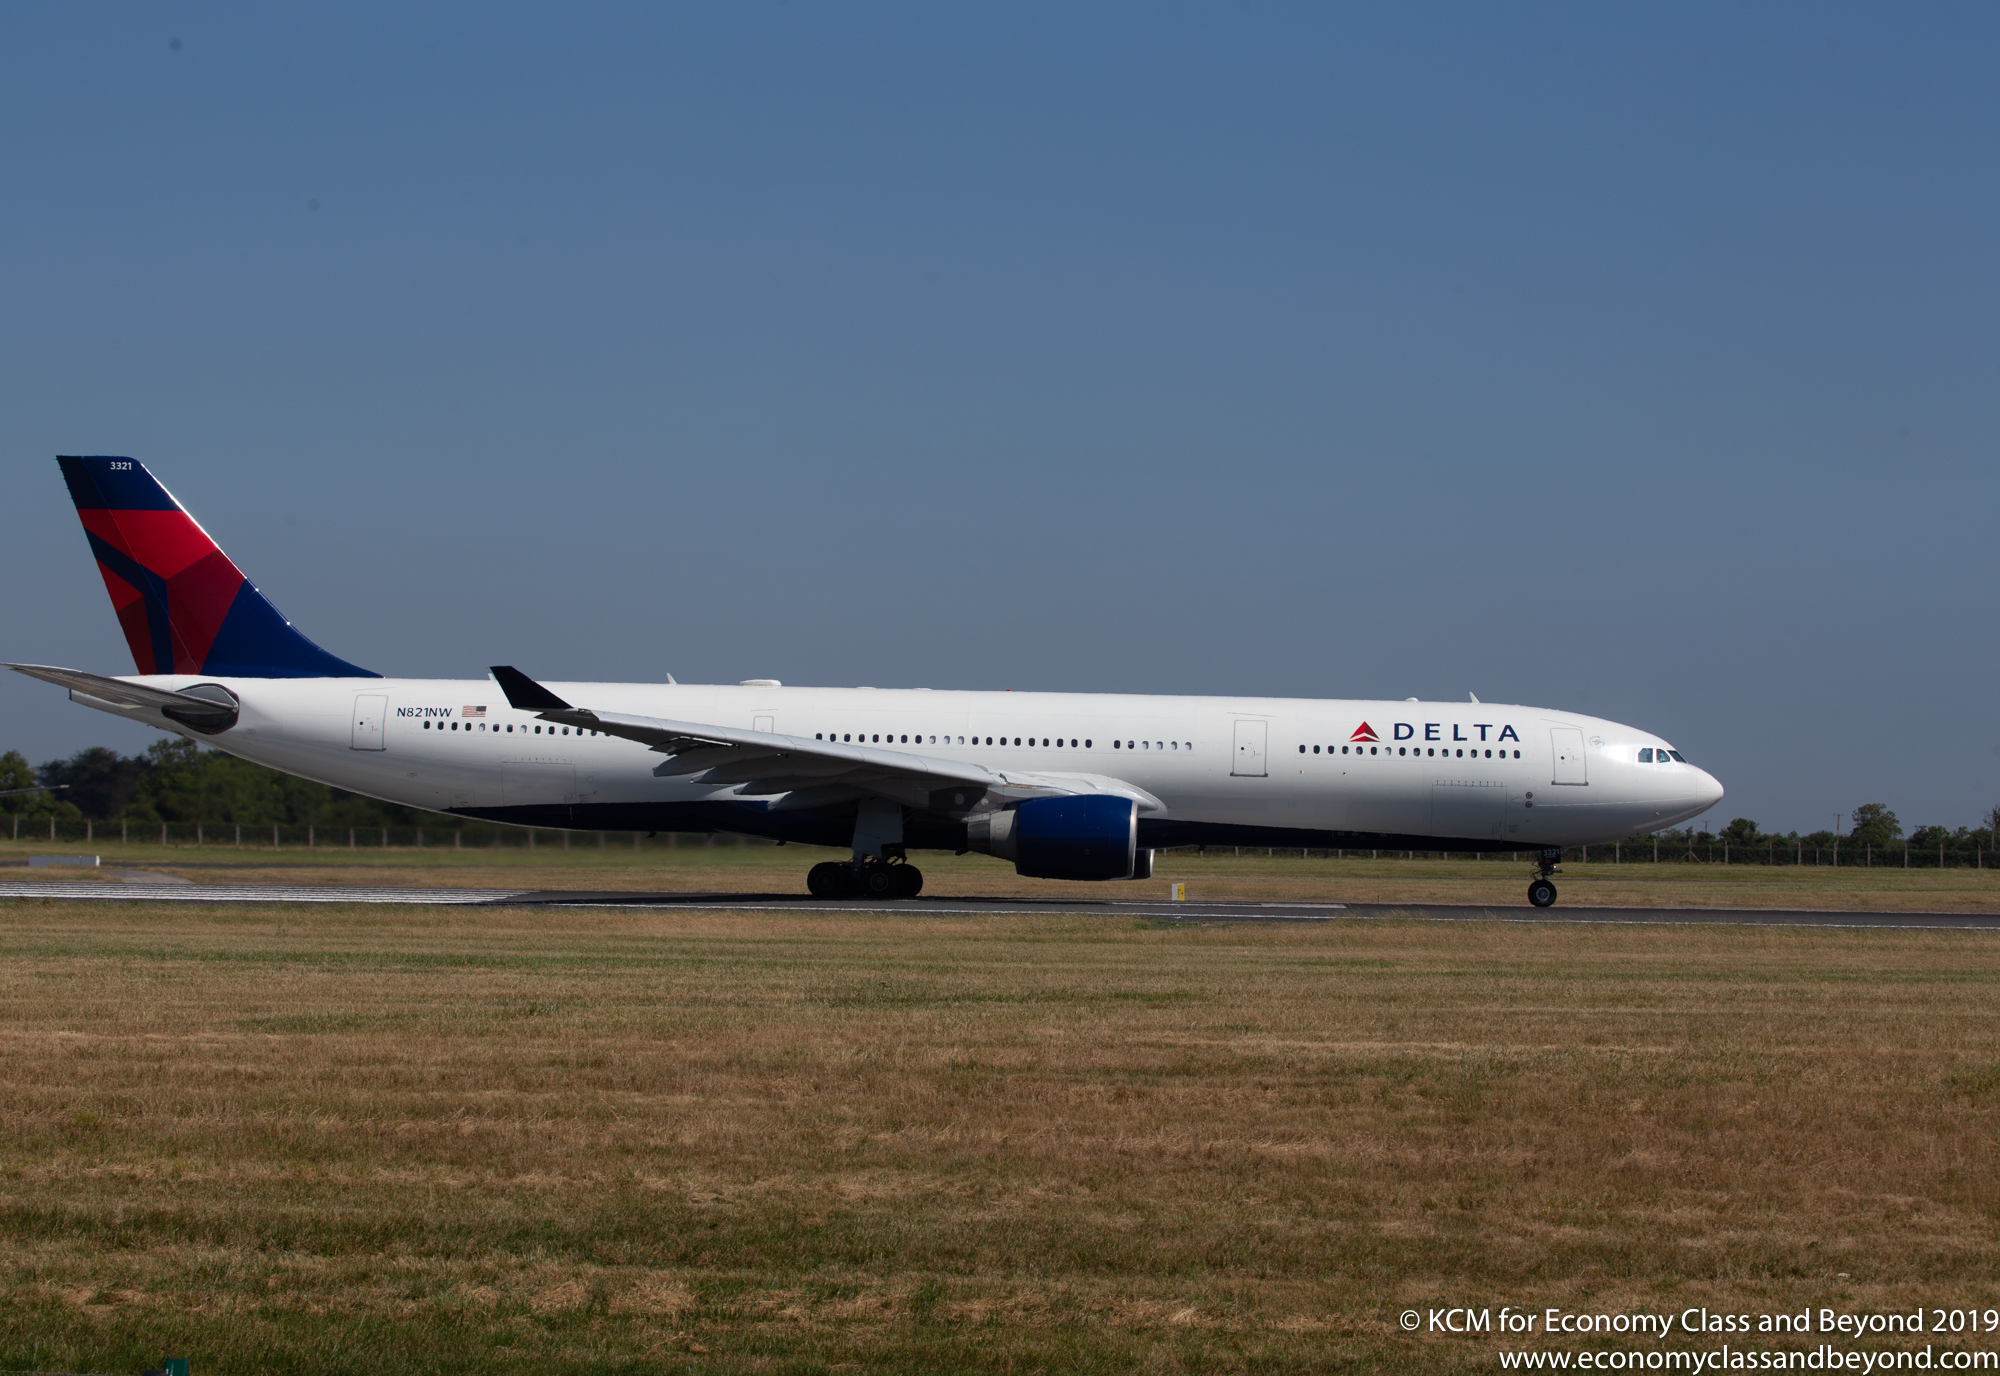 Delta Air Lines Airbus A330-300 preparing to depart Dublin - Image, Economy Class and Beyond